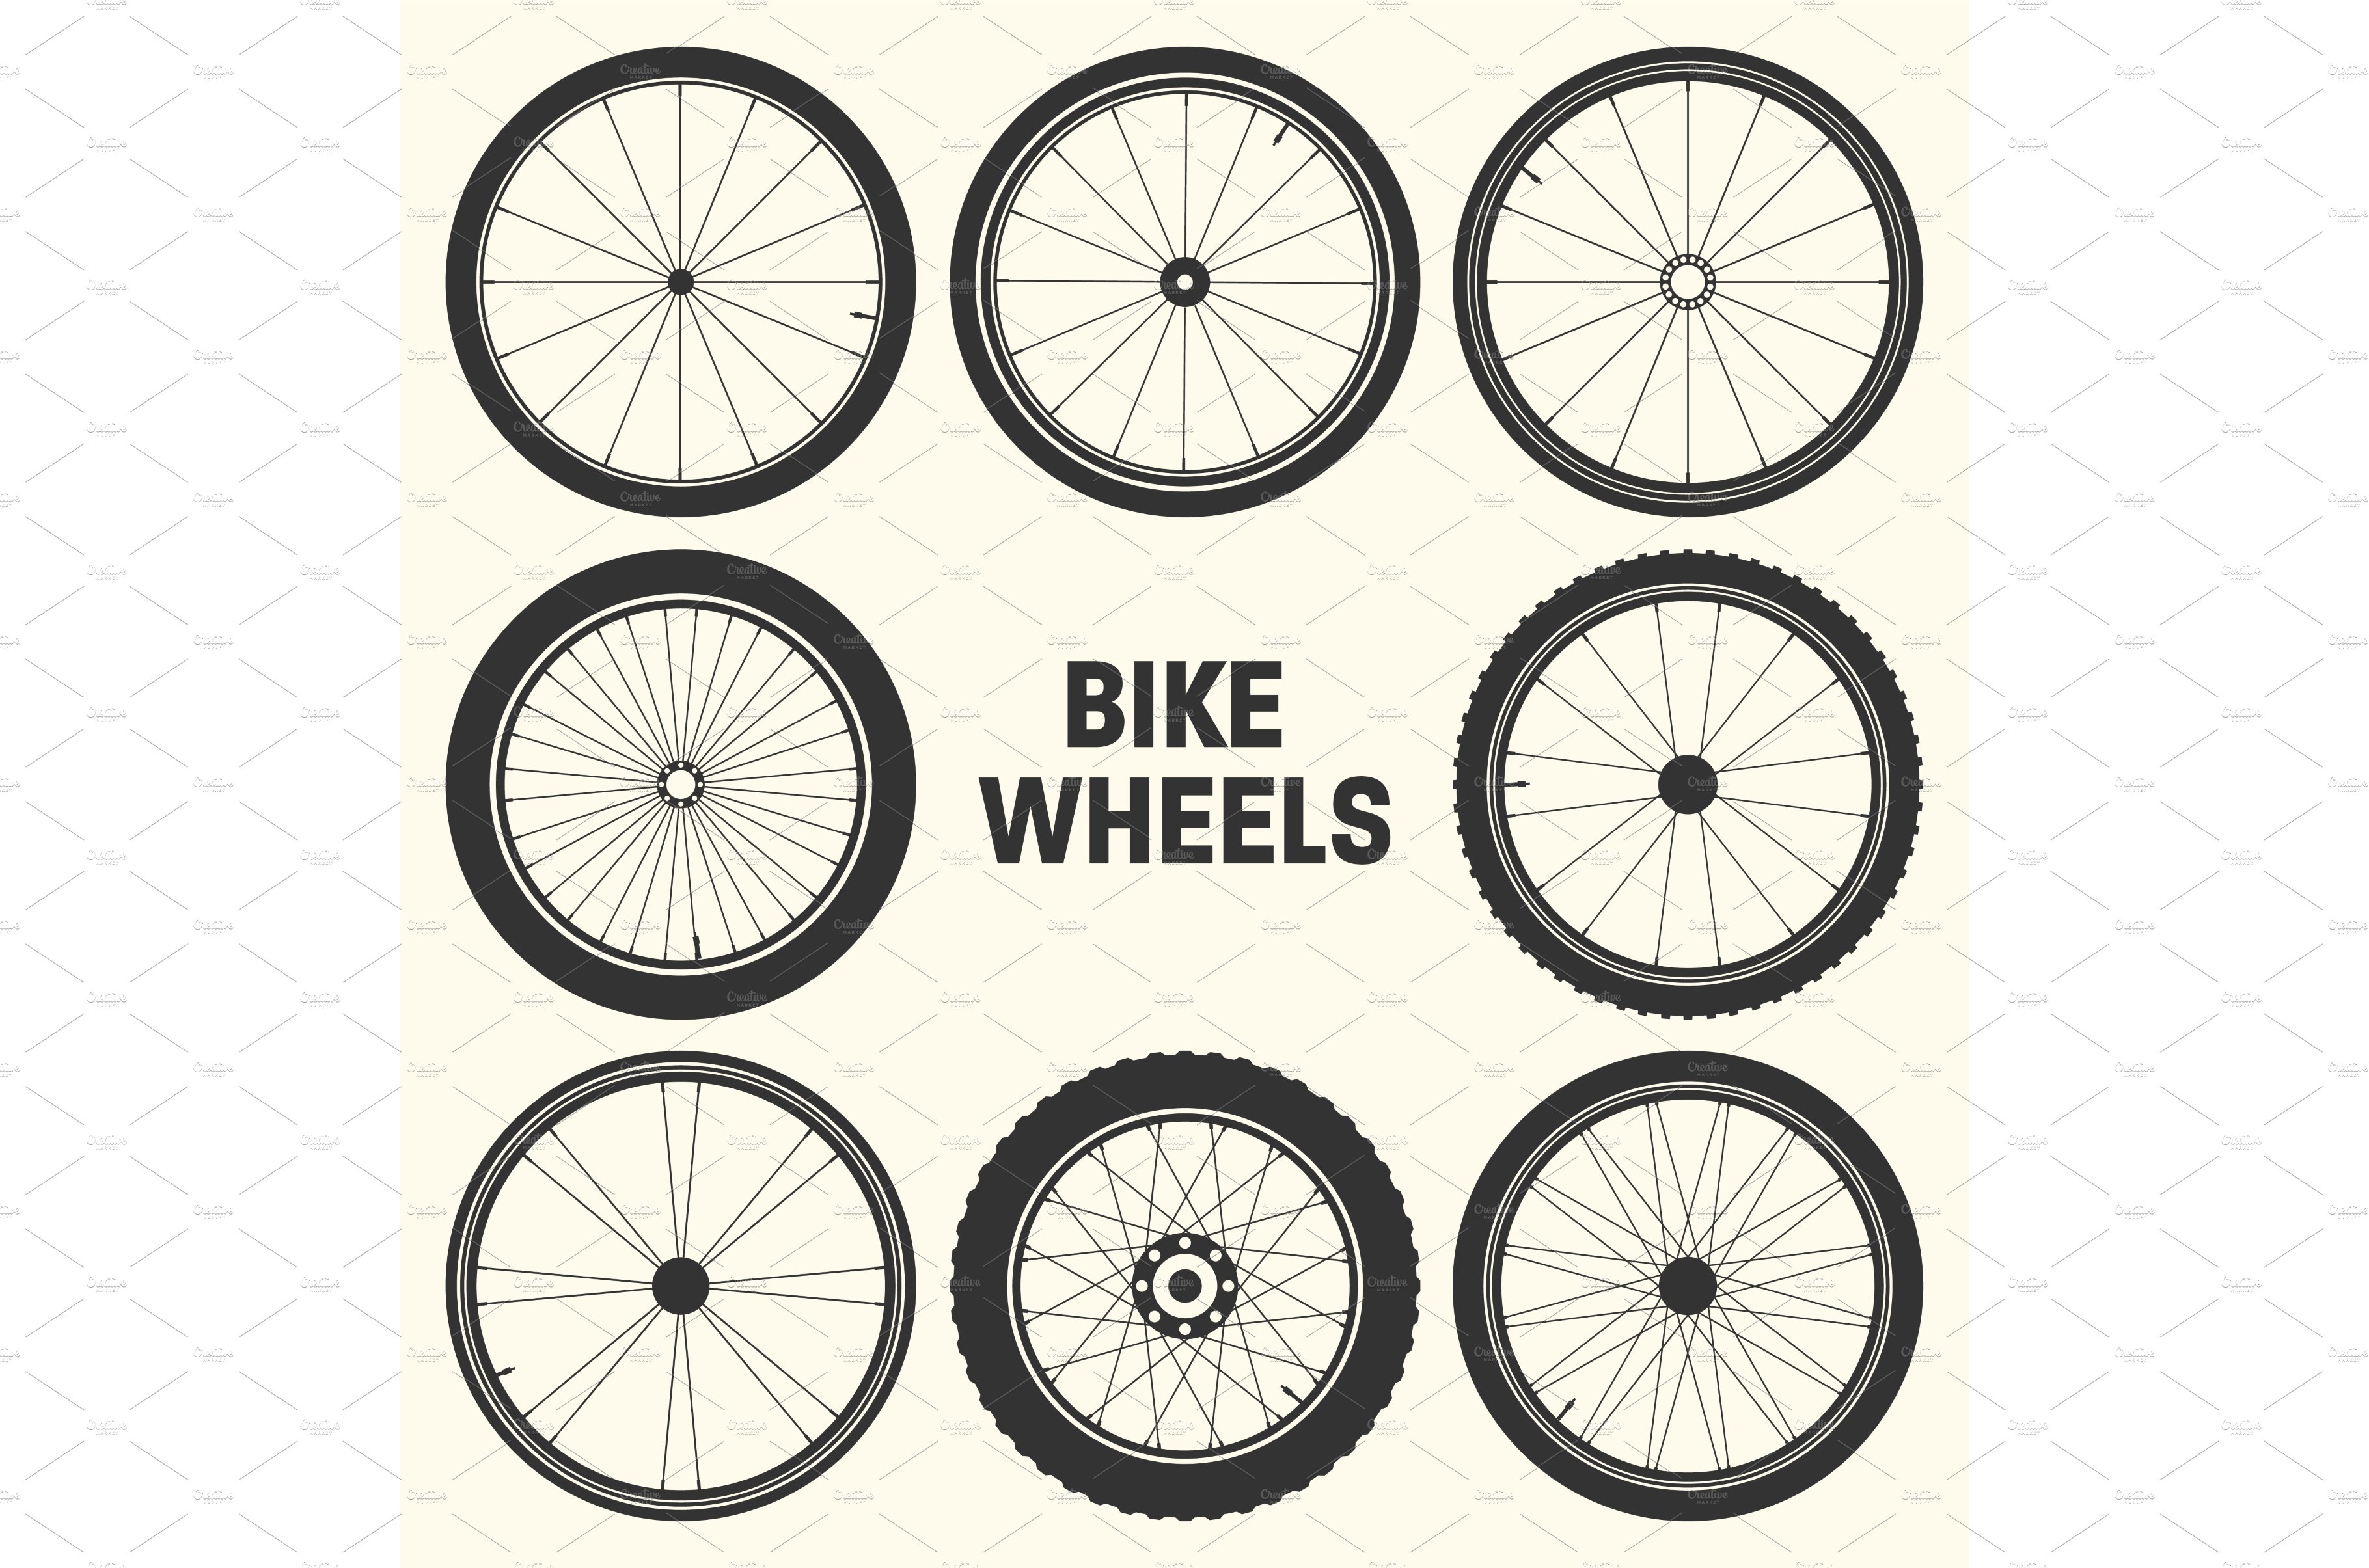 Bicycle wheel symbol vector cover image.